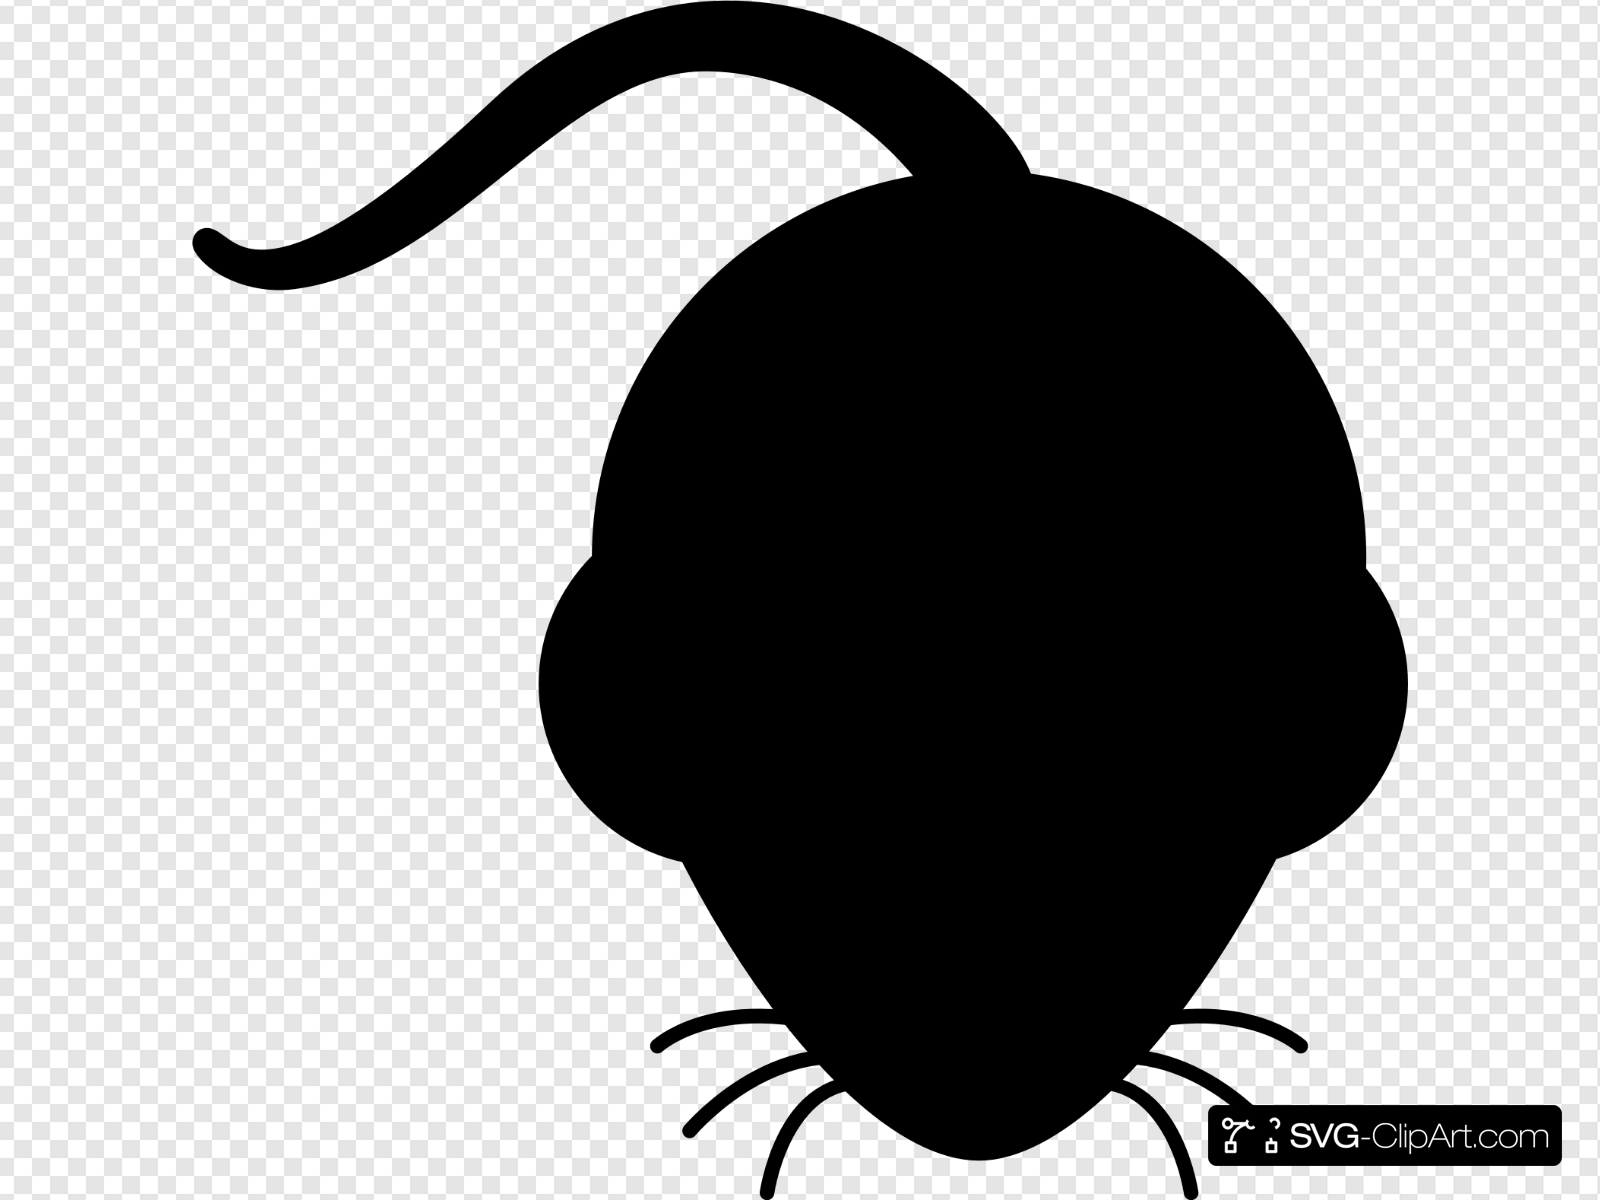 Mouse Silhouette Clip art, Icon and SVG.